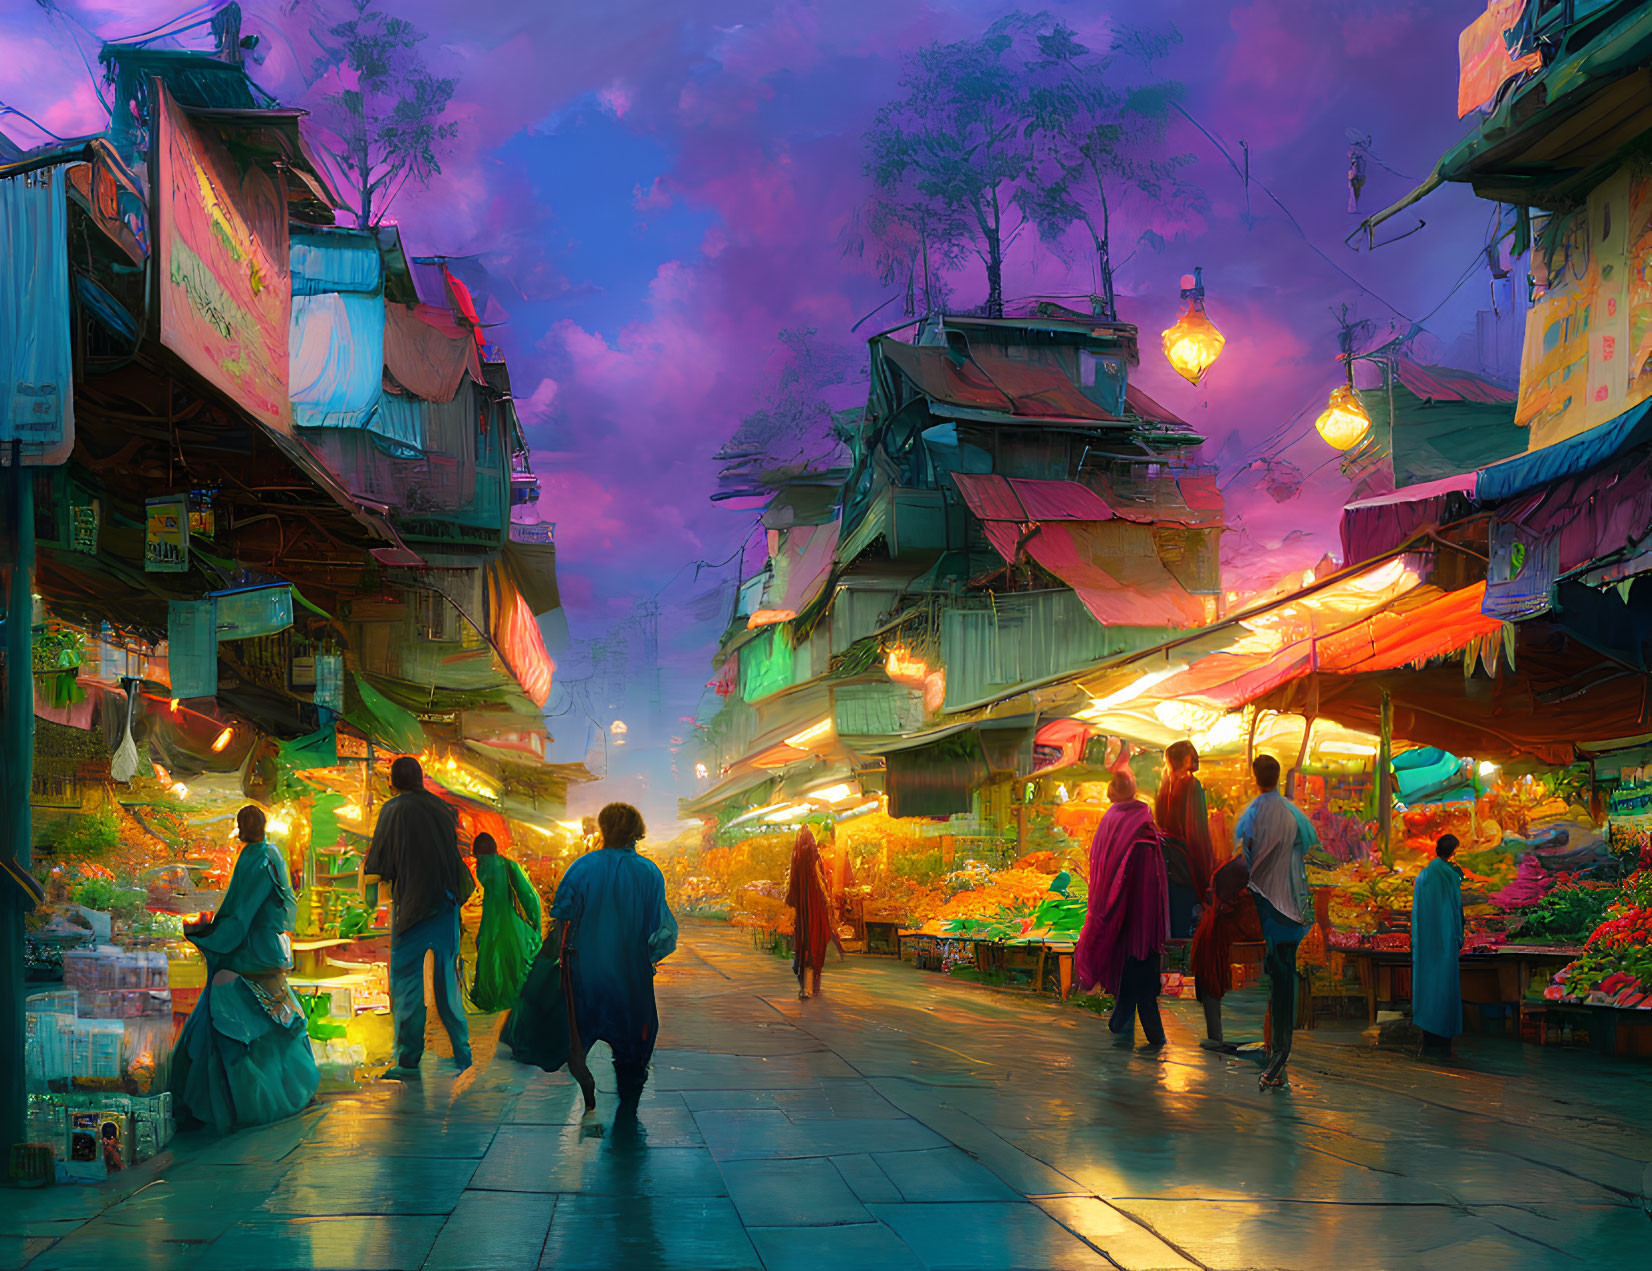 Colorful Dusk Scene: Market Street with Strolling People, Hanging Lanterns, and Goods Display